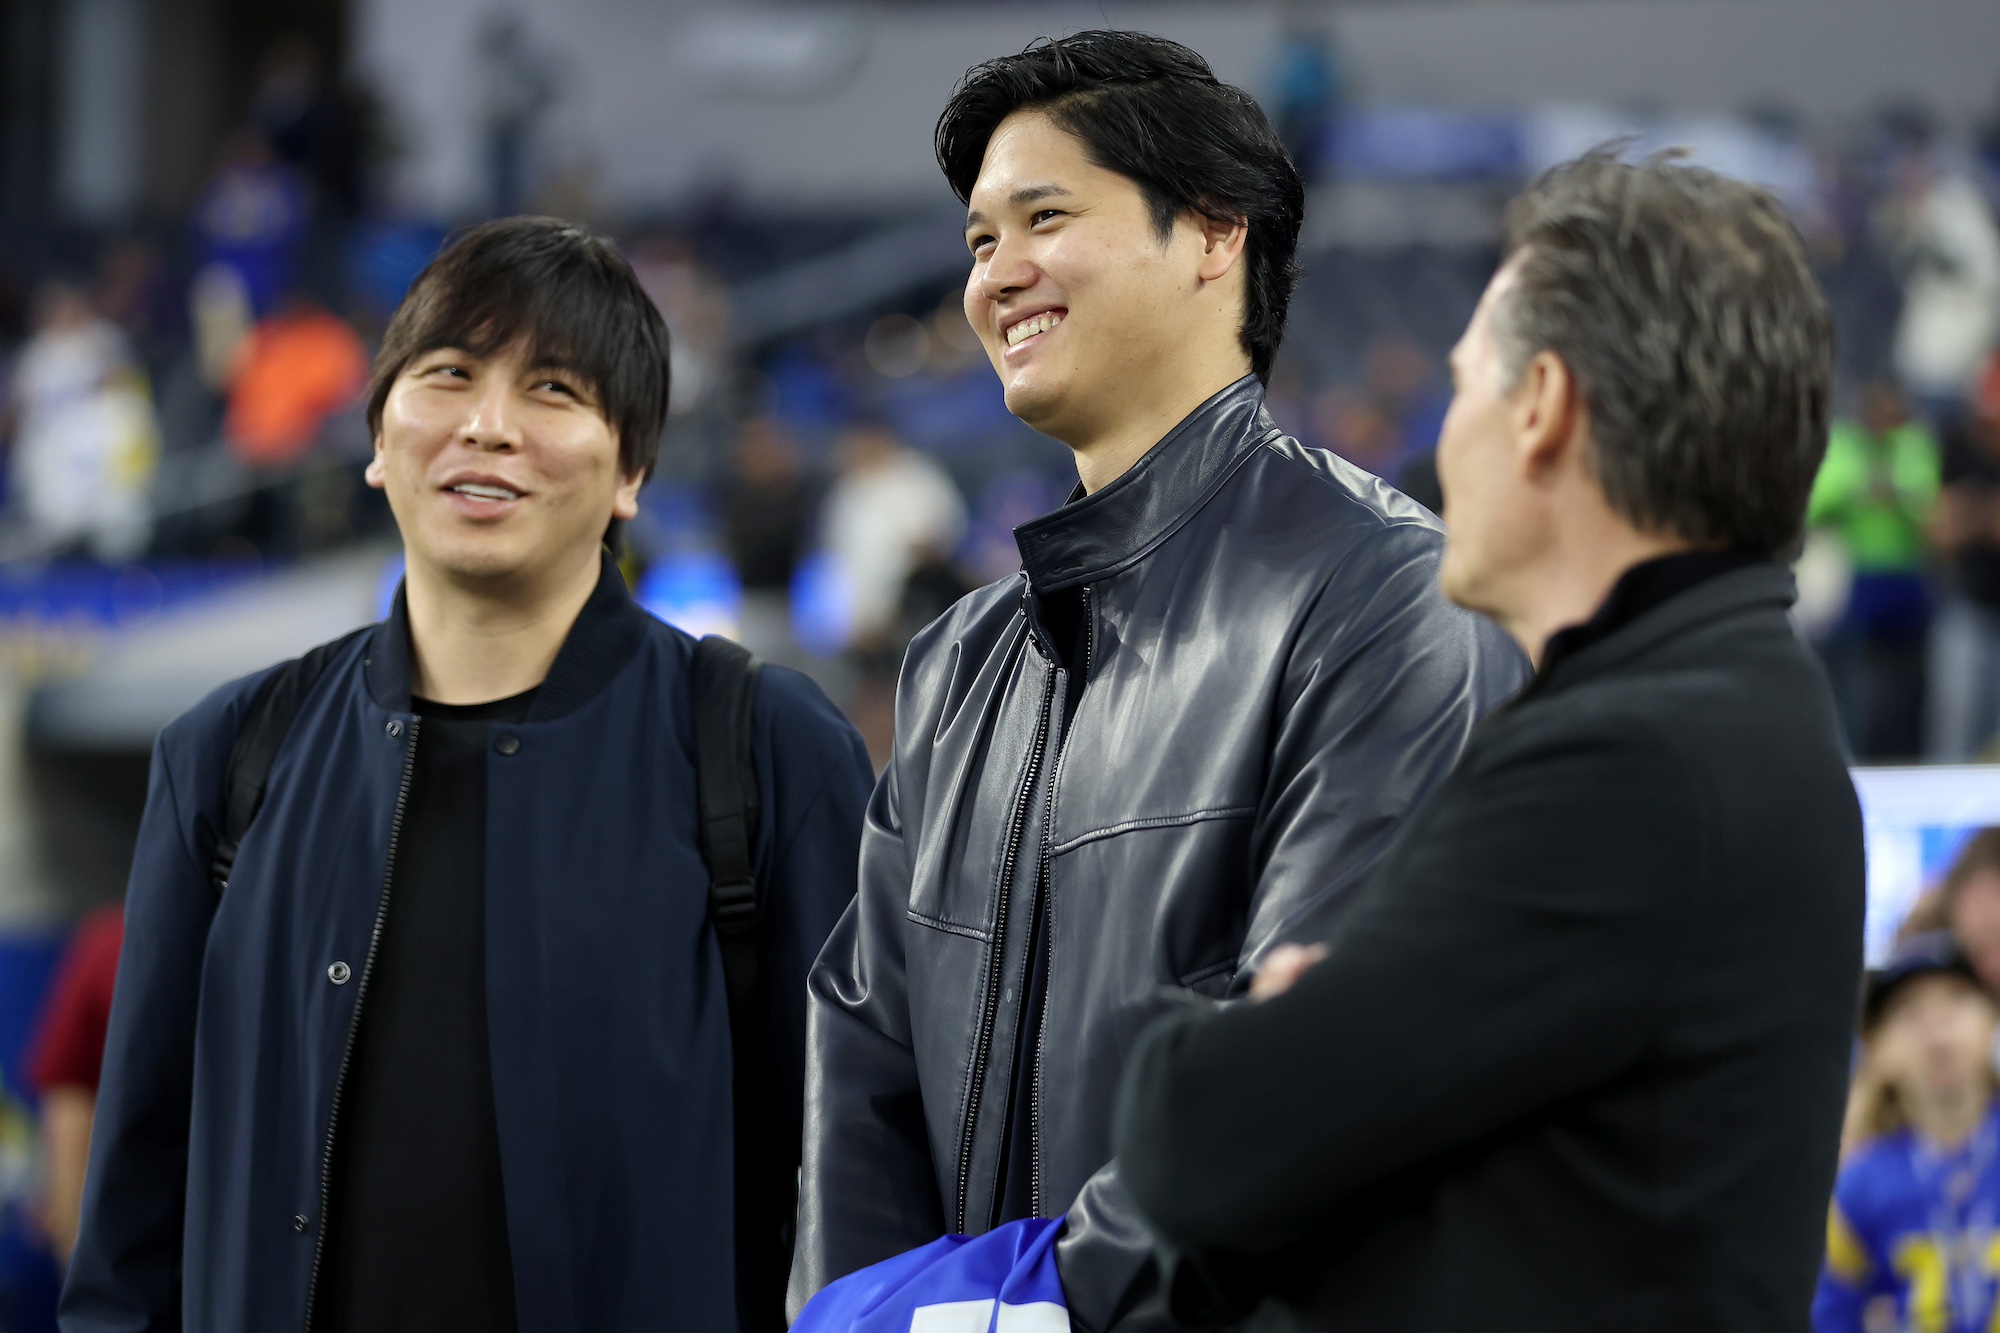 INGLEWOOD, CALIFORNIA - DECEMBER 21: Shohei Ohtani (C) of the Los Angeles Dodgers talks with his interpreter Ippei Mizuhara (L) and agent Nez Balelo (R) prior to the game between the New Orleans Saints and the Los Angeles Rams at SoFi Stadium on December 21, 2023 in Inglewood, California. (Photo by Sean M. Haffey/Getty Images)